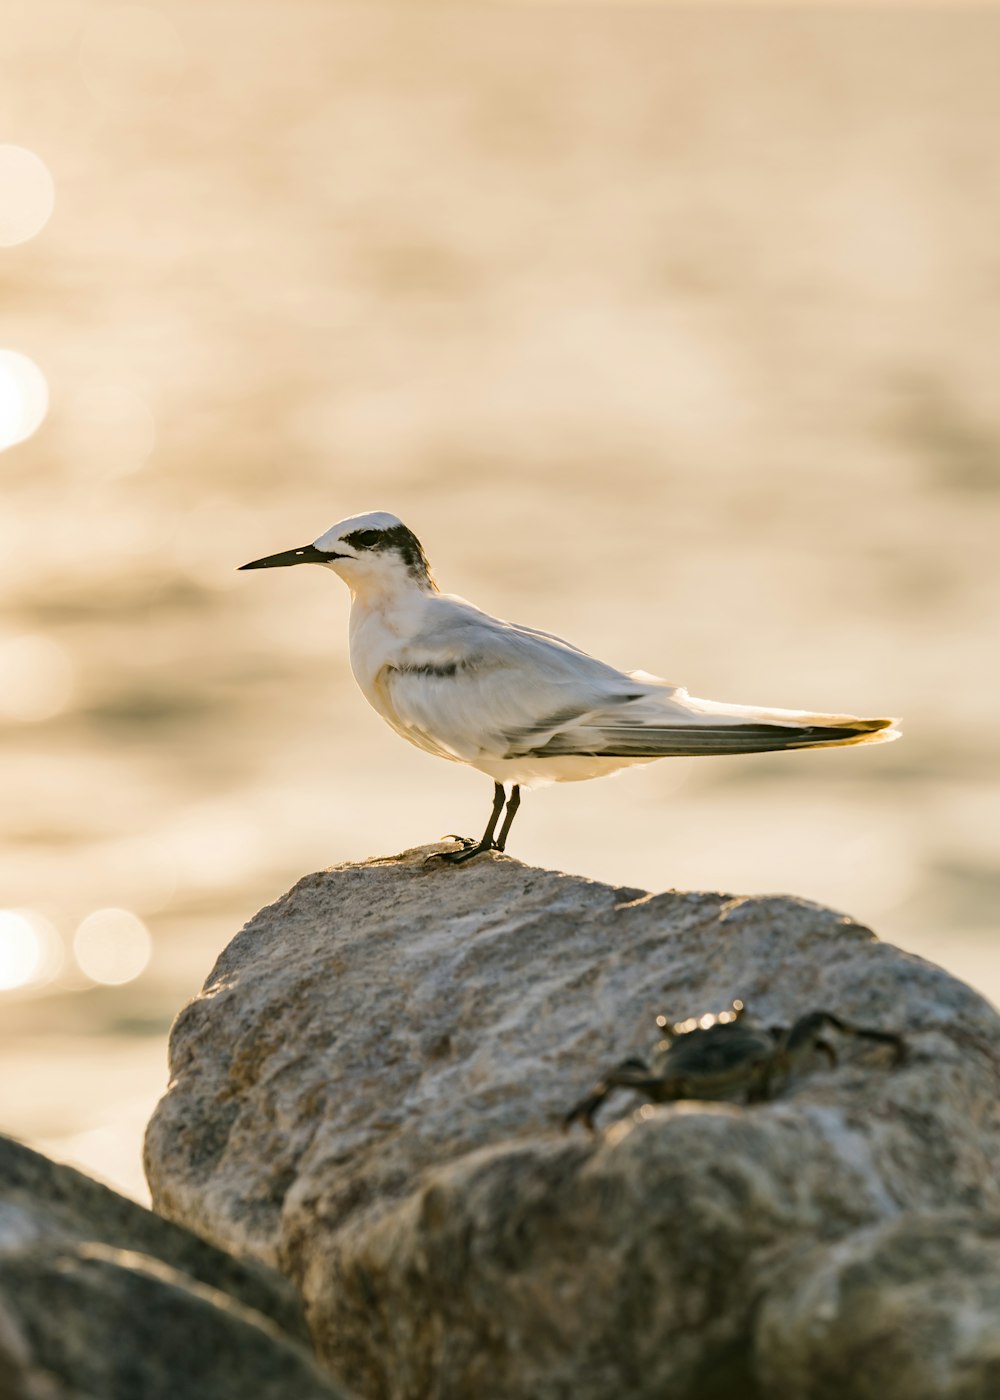 a small white bird sitting on a rock by the water